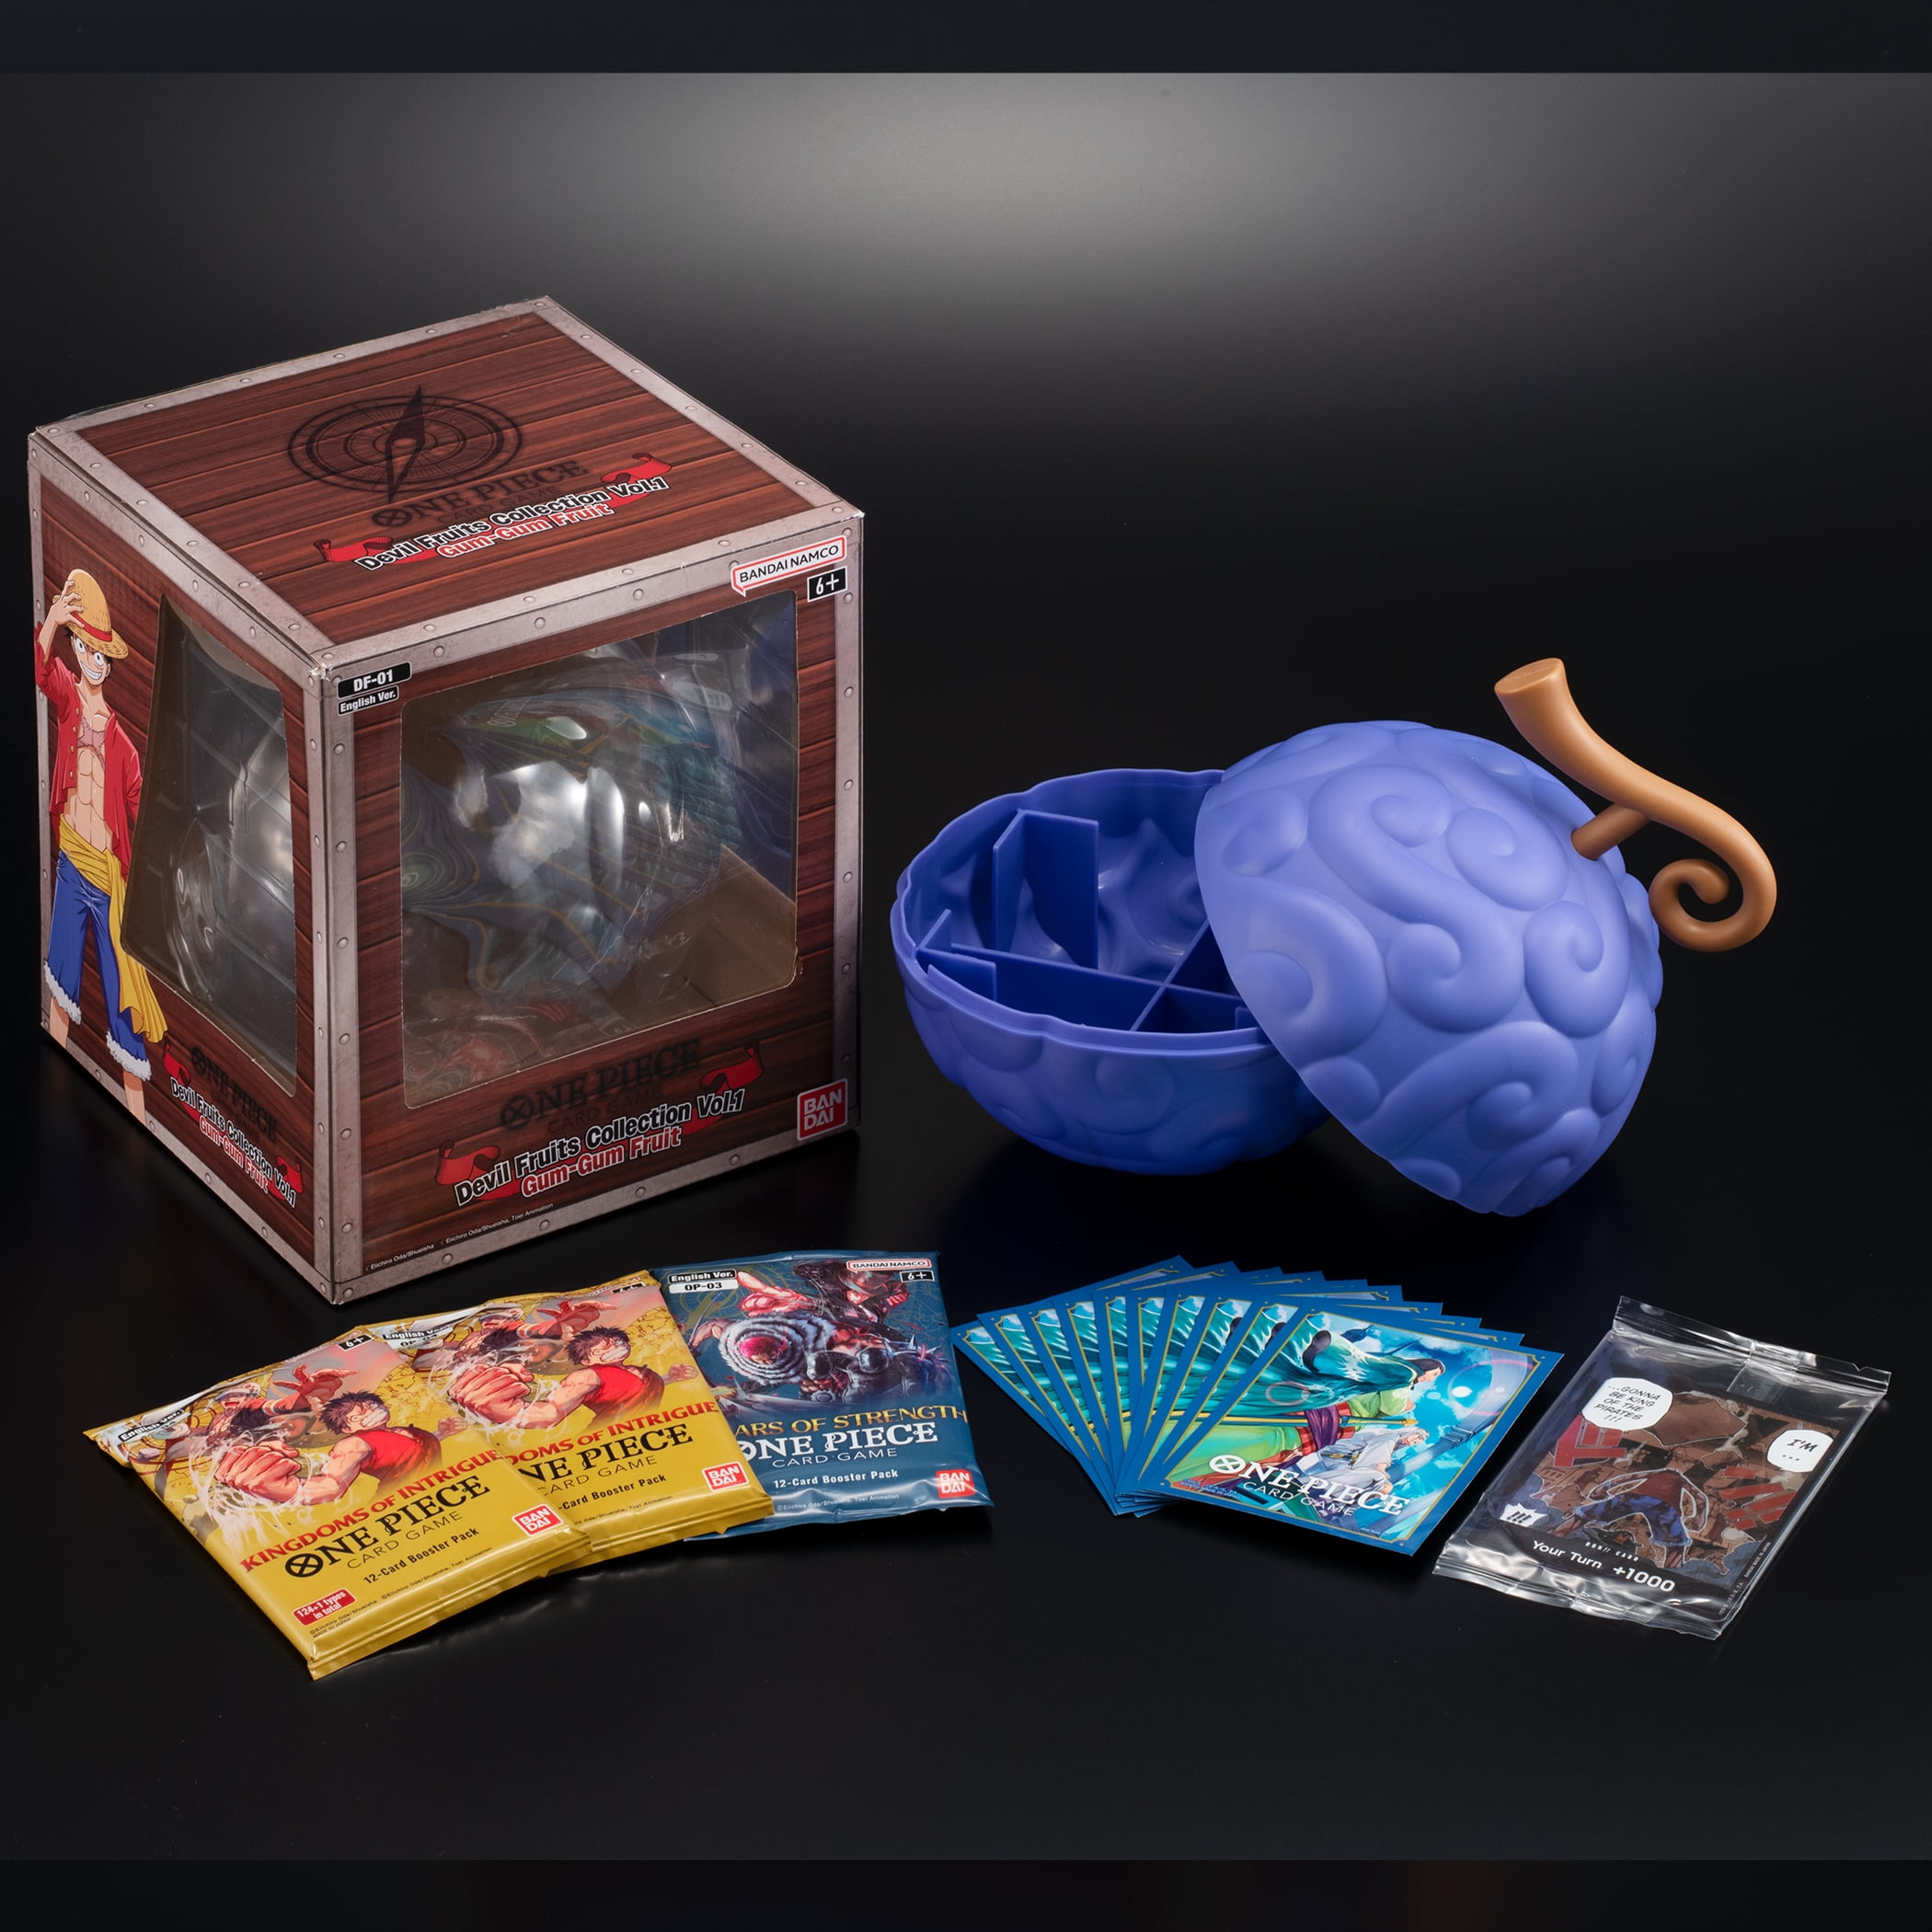 One Piece - The Devil Fruit (2) - 1/1 - Ope Ope no Mi (Bandai)